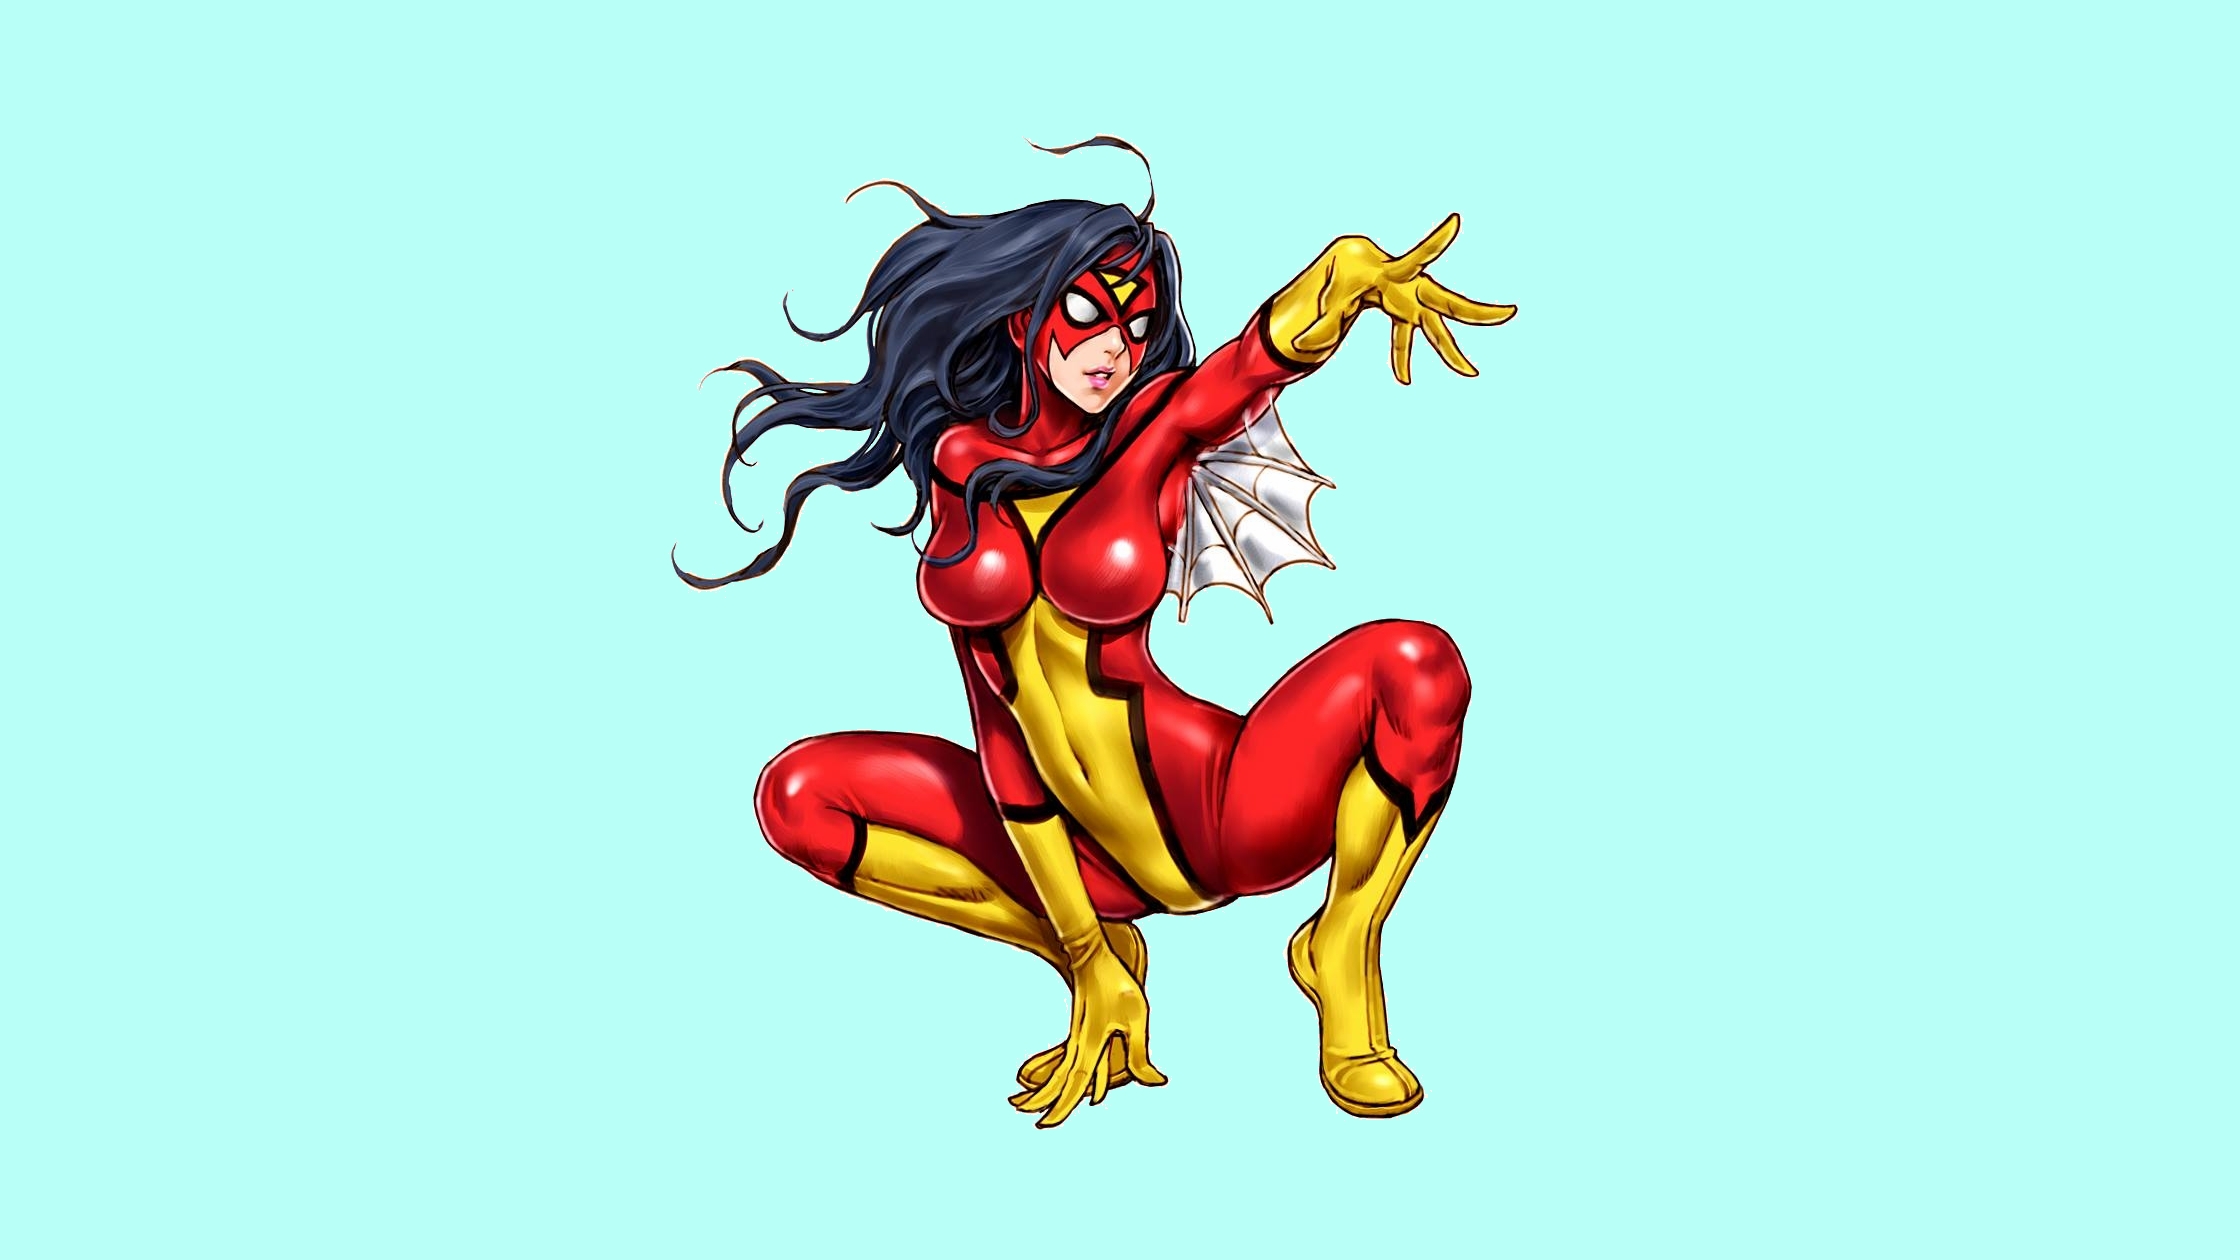 Spider-Woman Images. 